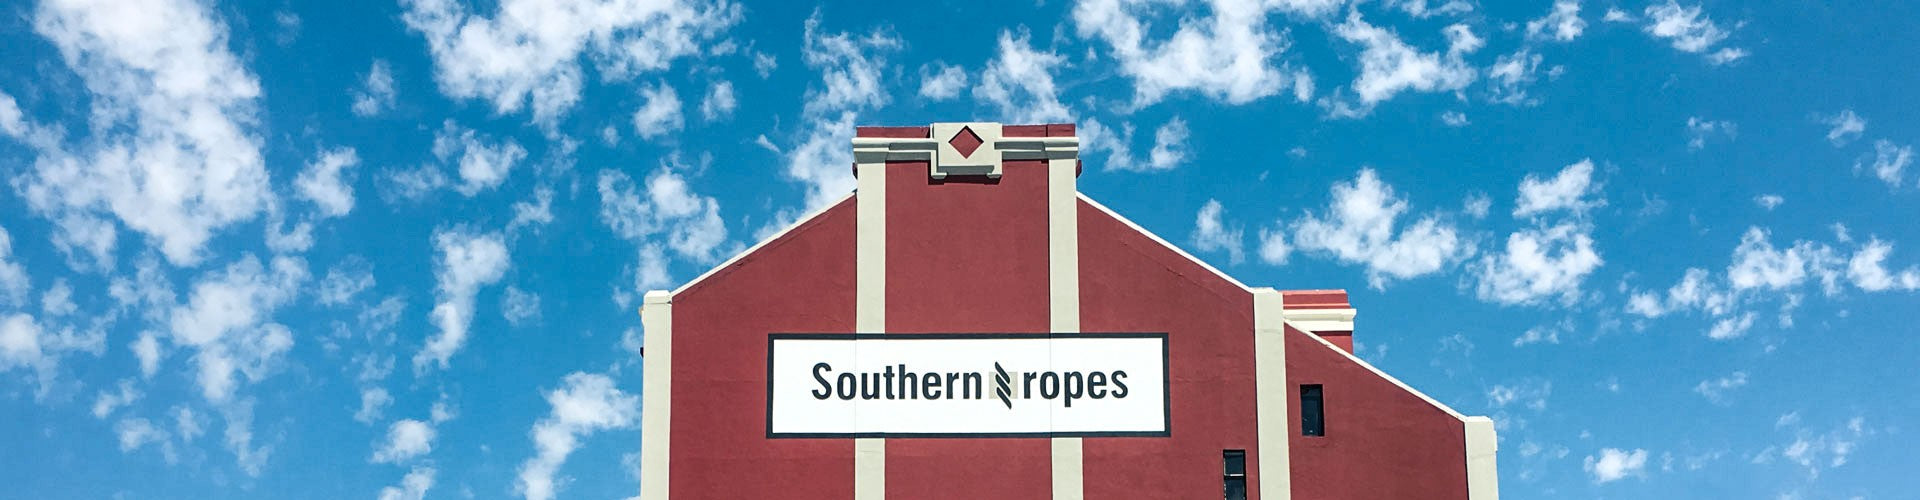 Southern Ropes Factory Shop